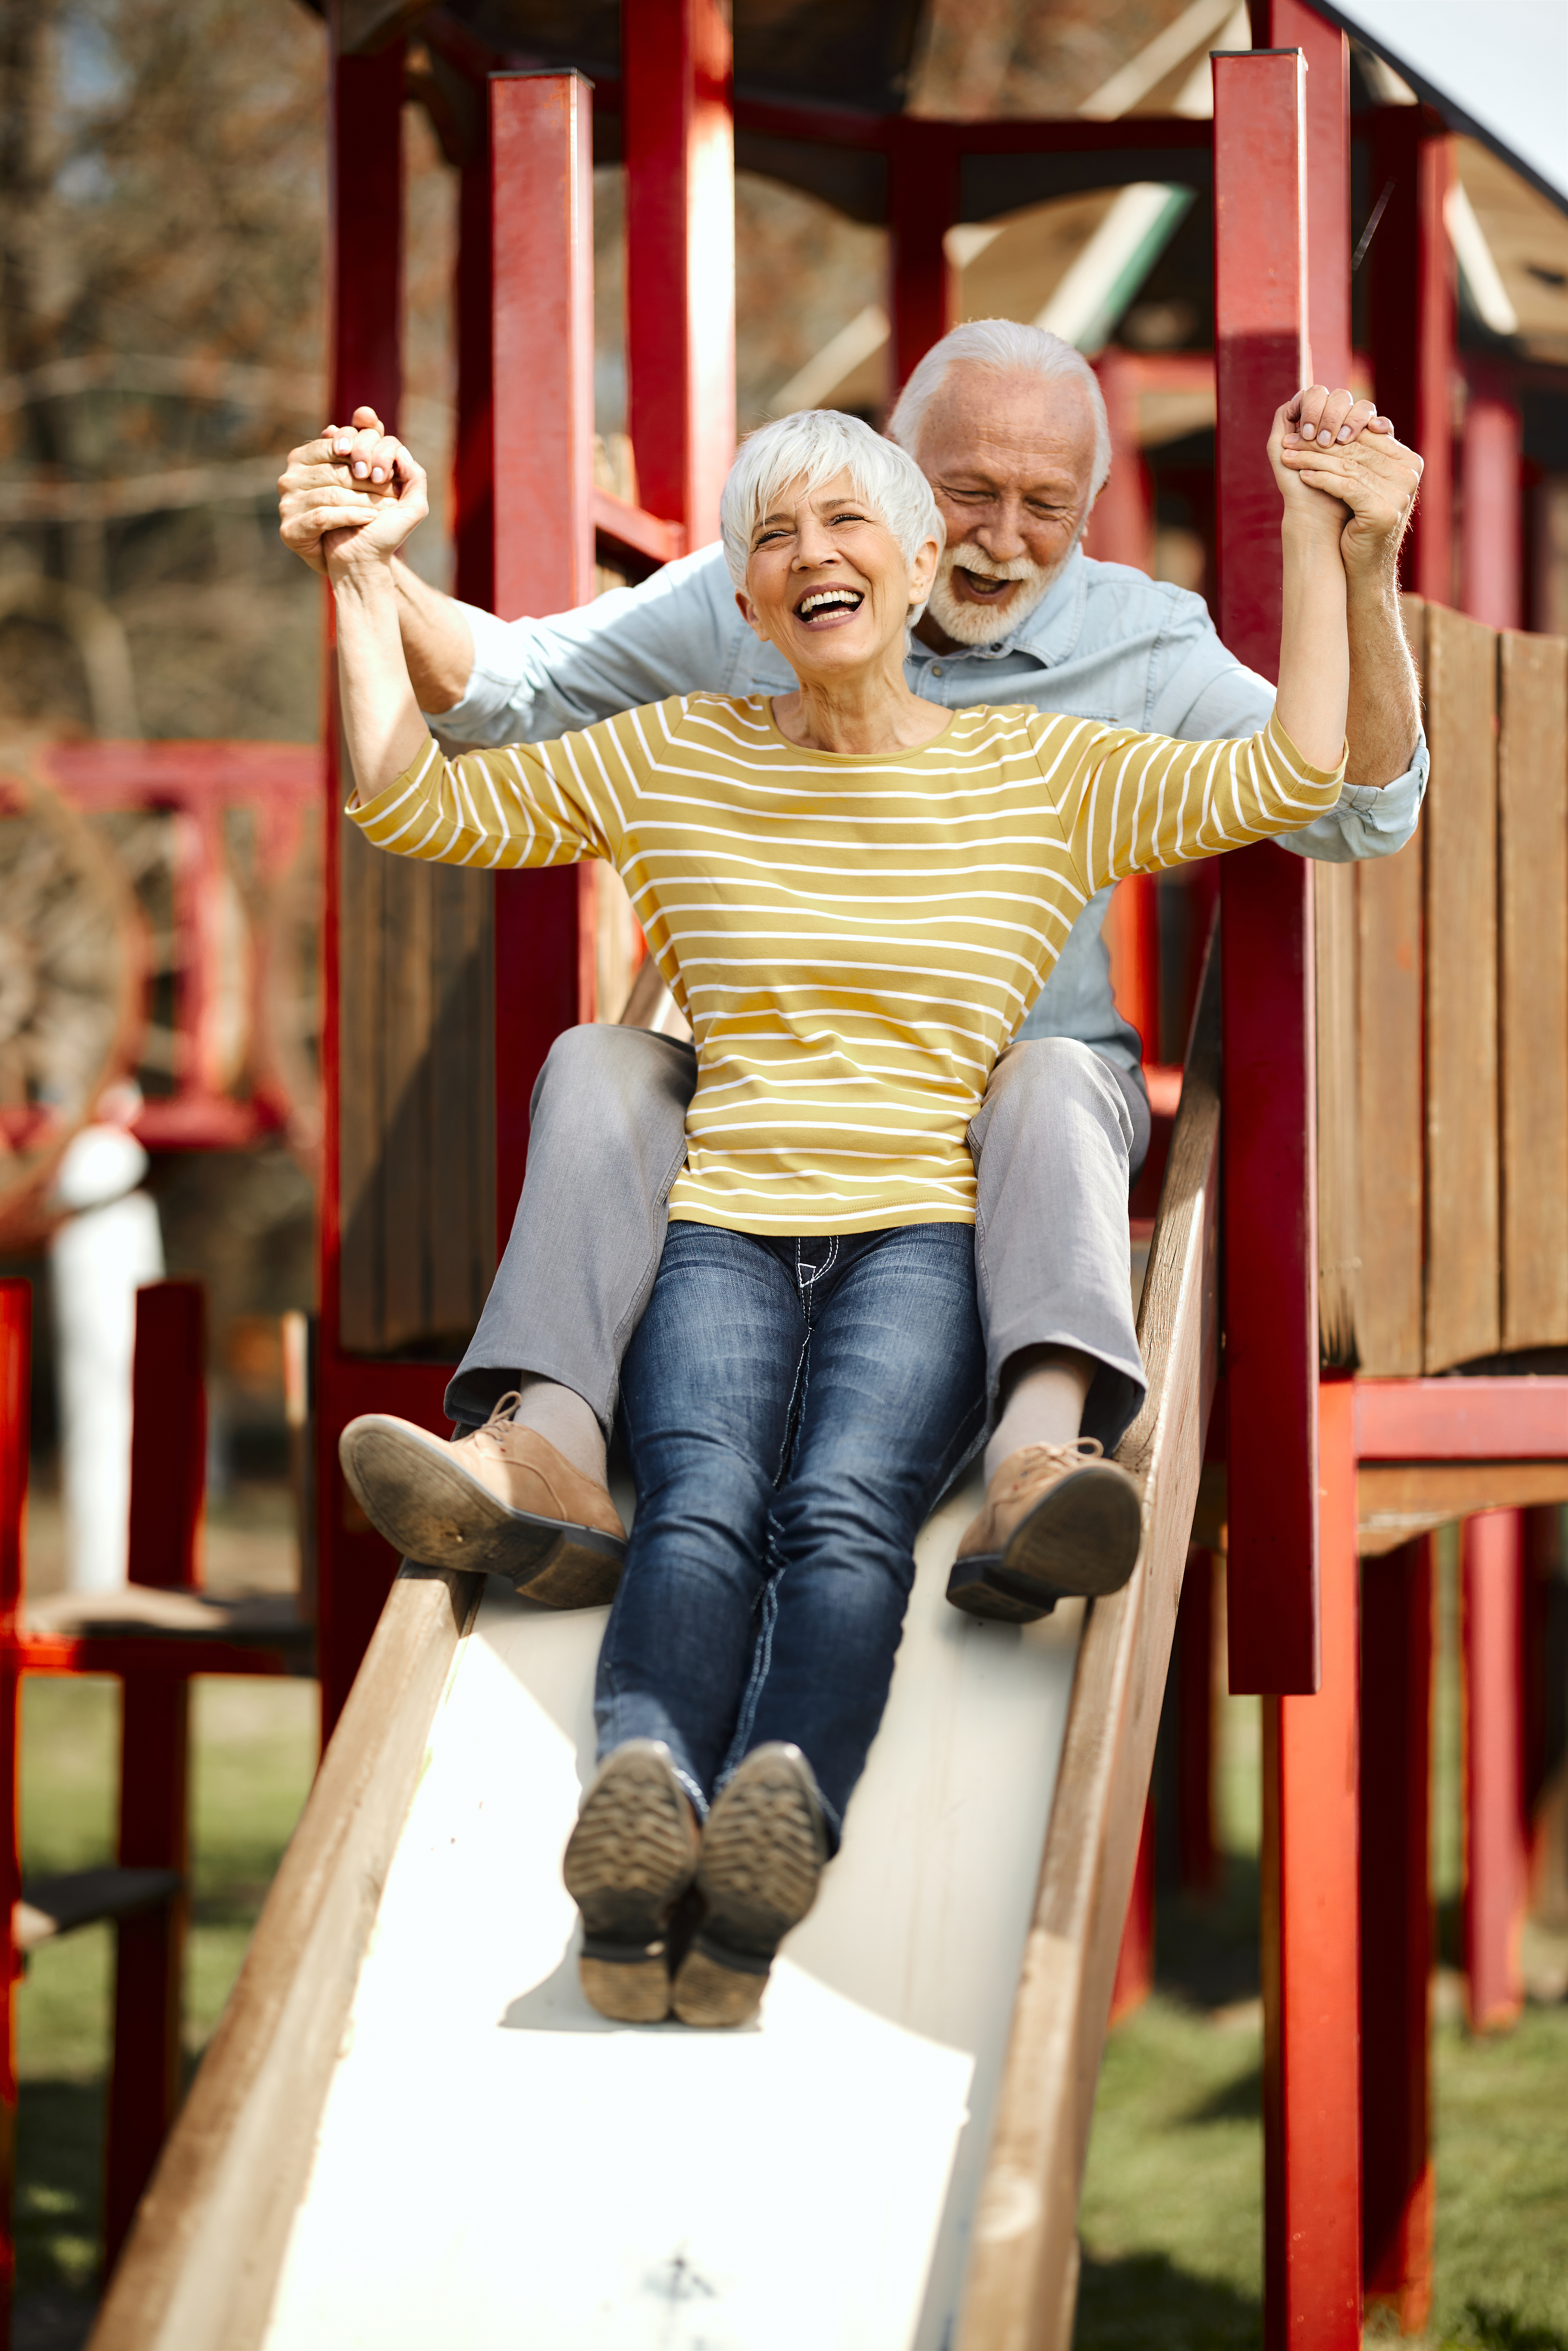 Two smiling older people going down a slide